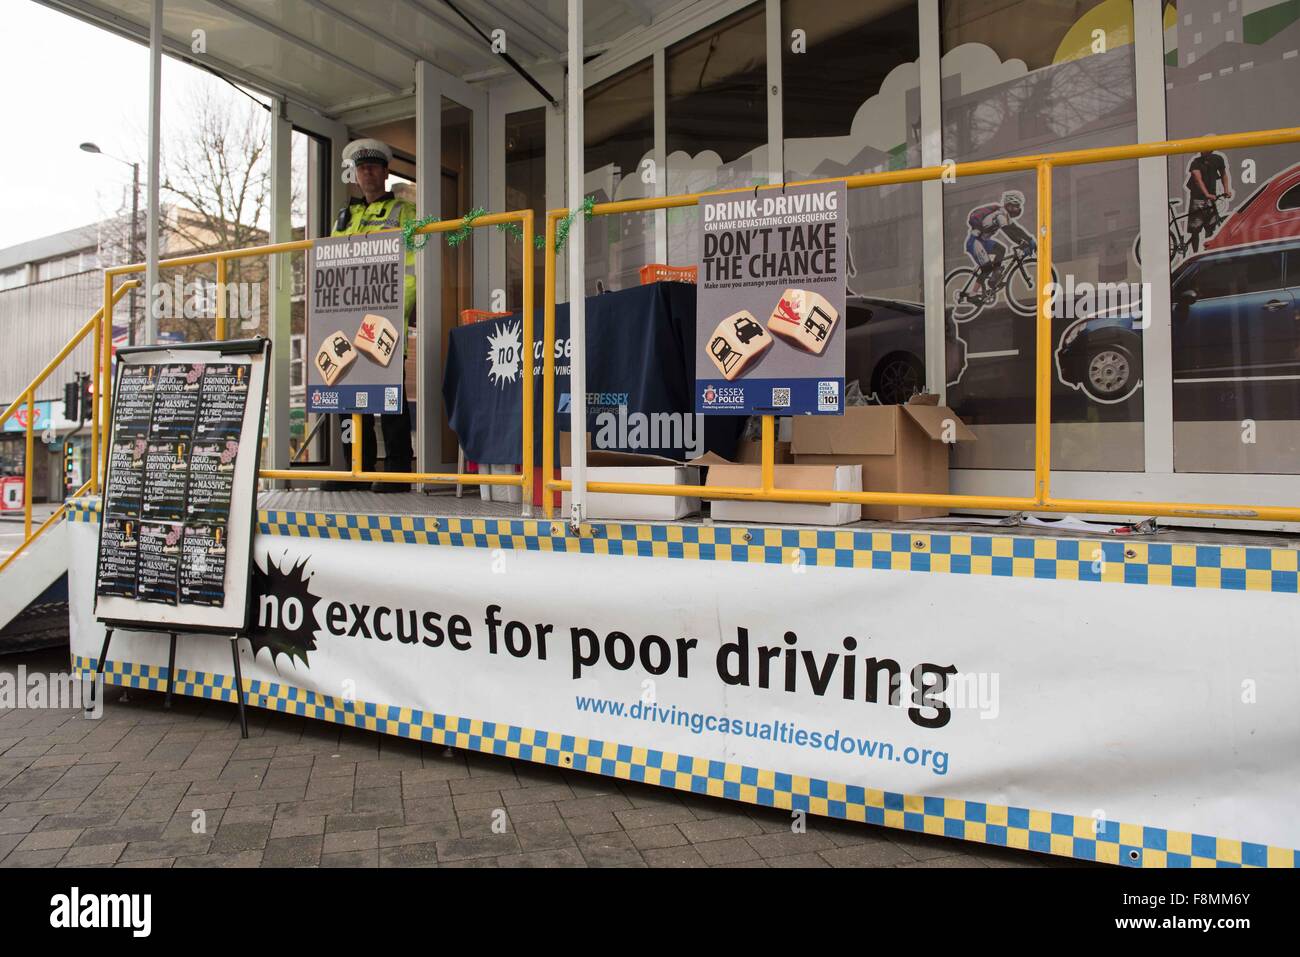 Brentwood, Essex, UK. 10th December, 2015. Essex safer Roads partnership were in Brentwood High Street raising awareness of drink and drug Driving with representatives from Police Fire and Brentwood Council Credit:  Ian Davidson/Alamy Live News Stock Photo